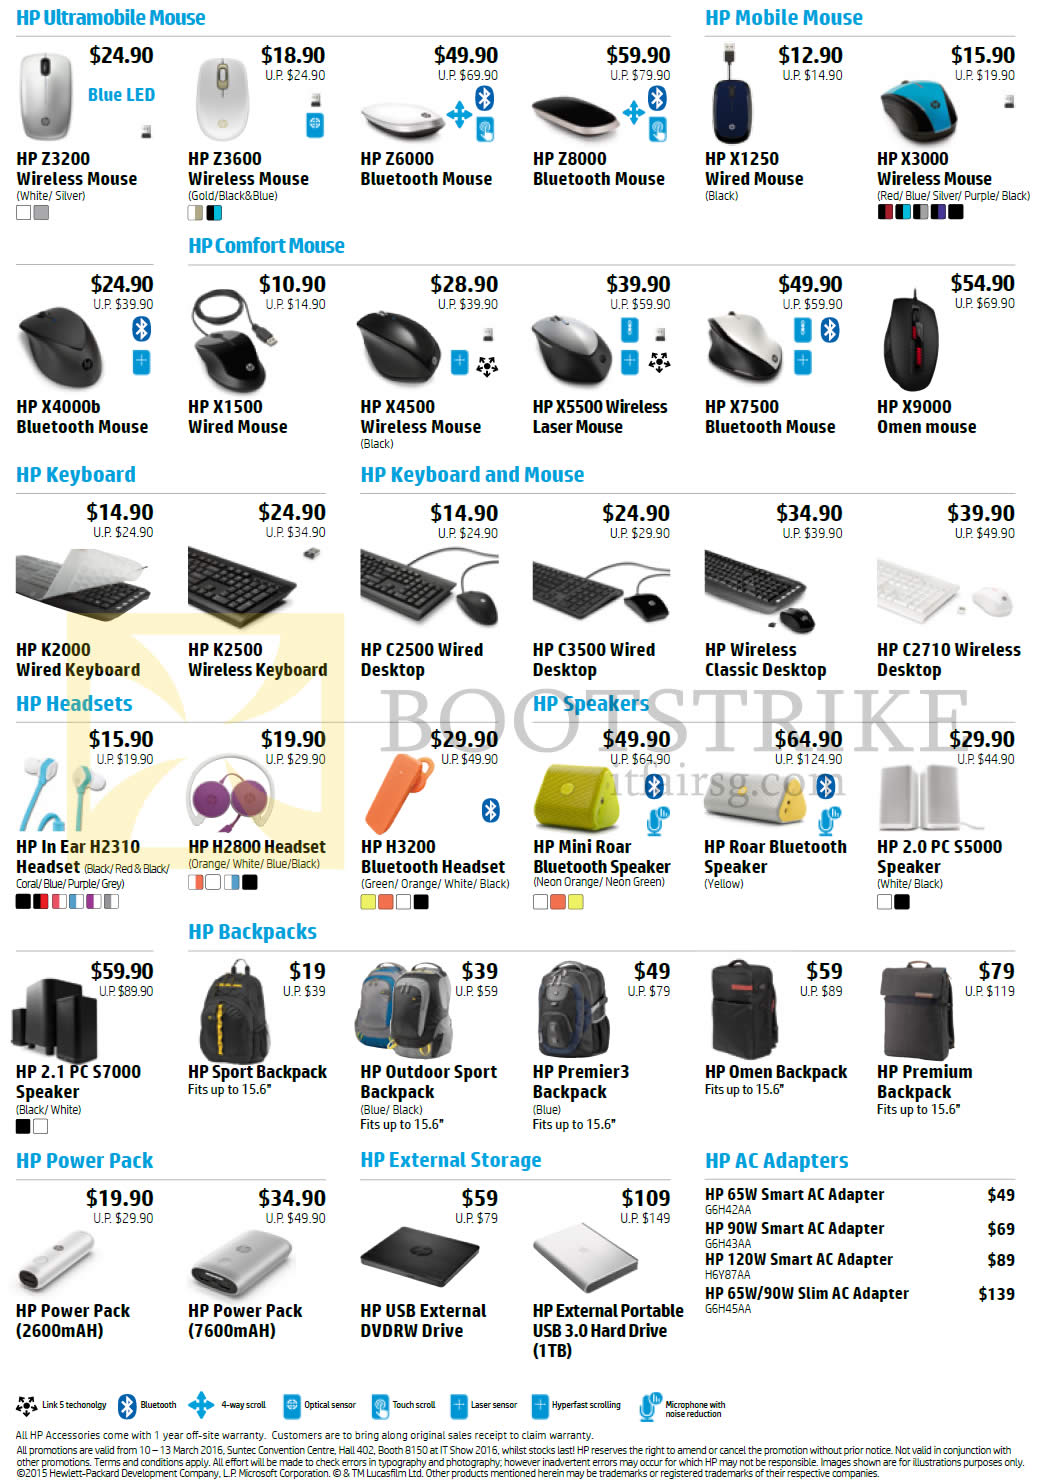 IT SHOW 2016 price list image brochure of HP Accessories Mouse, Keyboards, Backpacks, Headset, Blueeoth Speaker, Wireless, Classic, Wired, Omen, AC Adapters, Power Pack